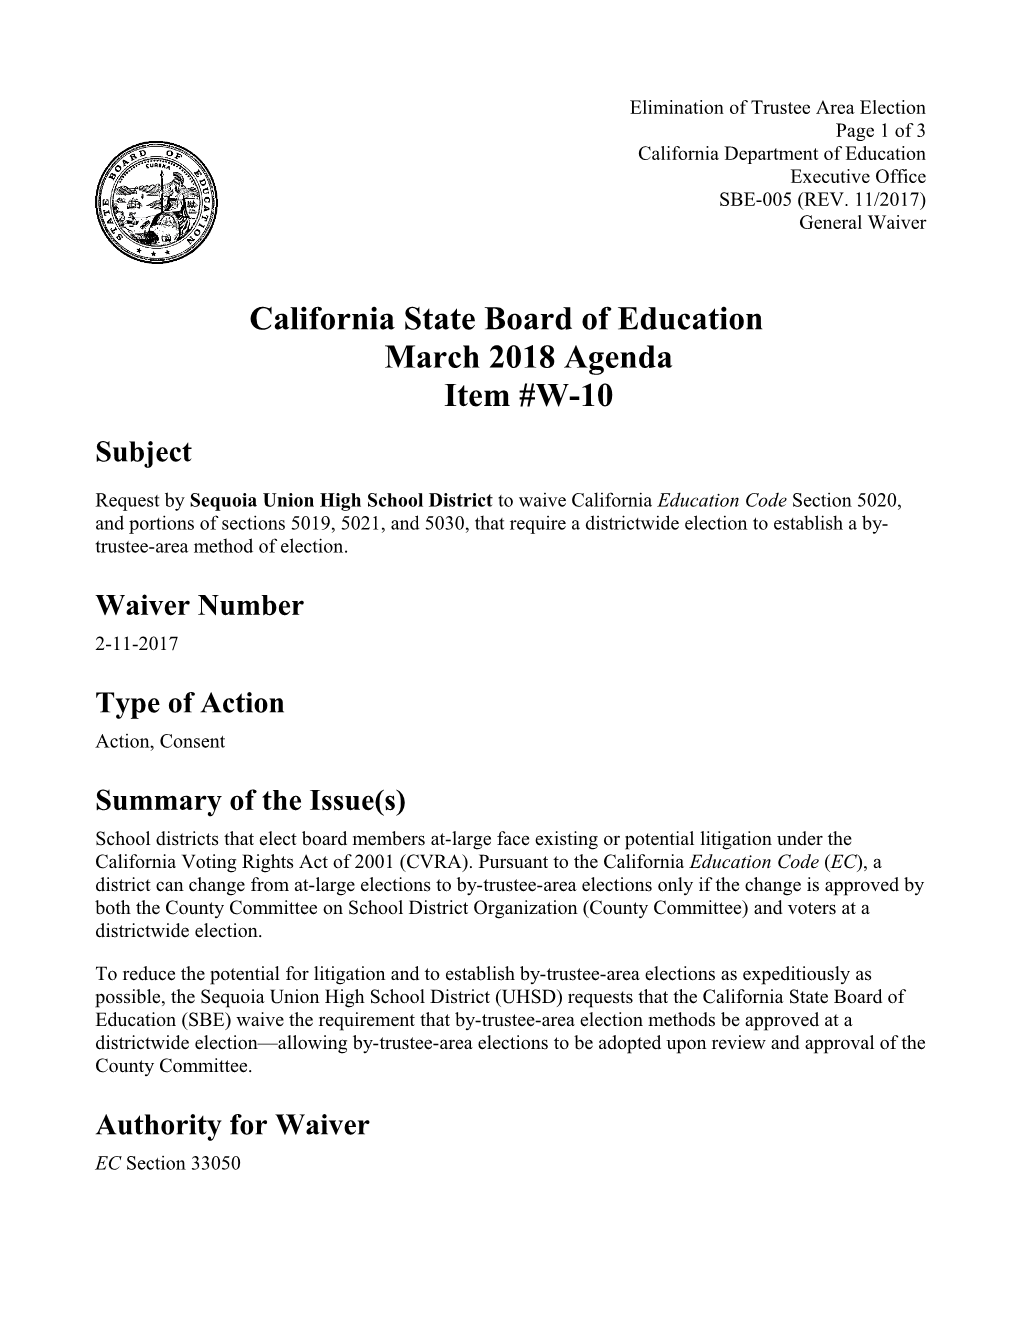 March 2018 Waiver Item W-10 - Meeting Agendas (CA State Board of Education)